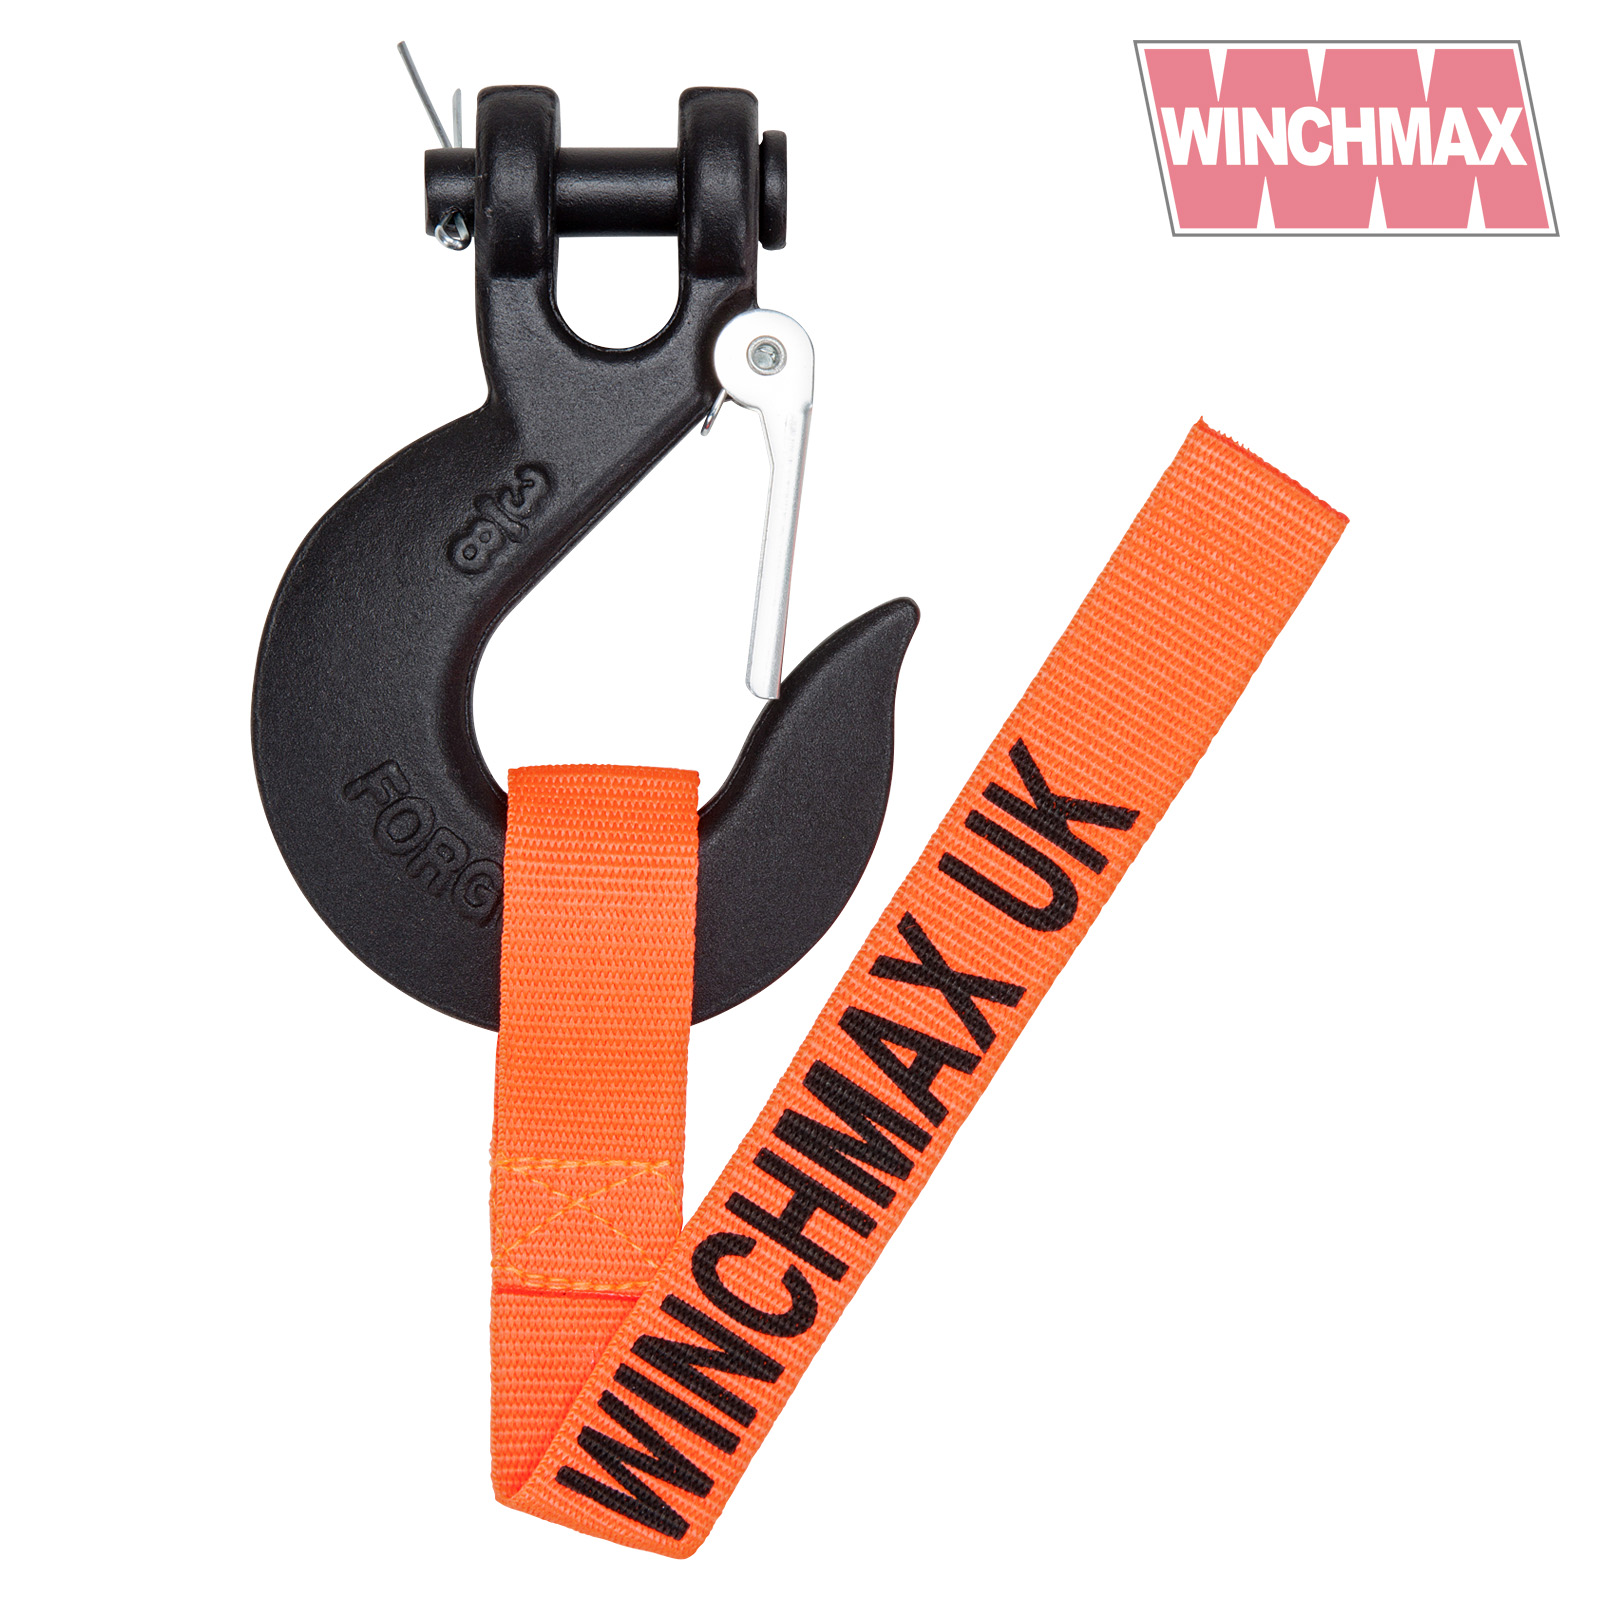 Winchmax Winch Hook Suitable for Winches up to 14,000lb ⅜ Clevis Forged G70 